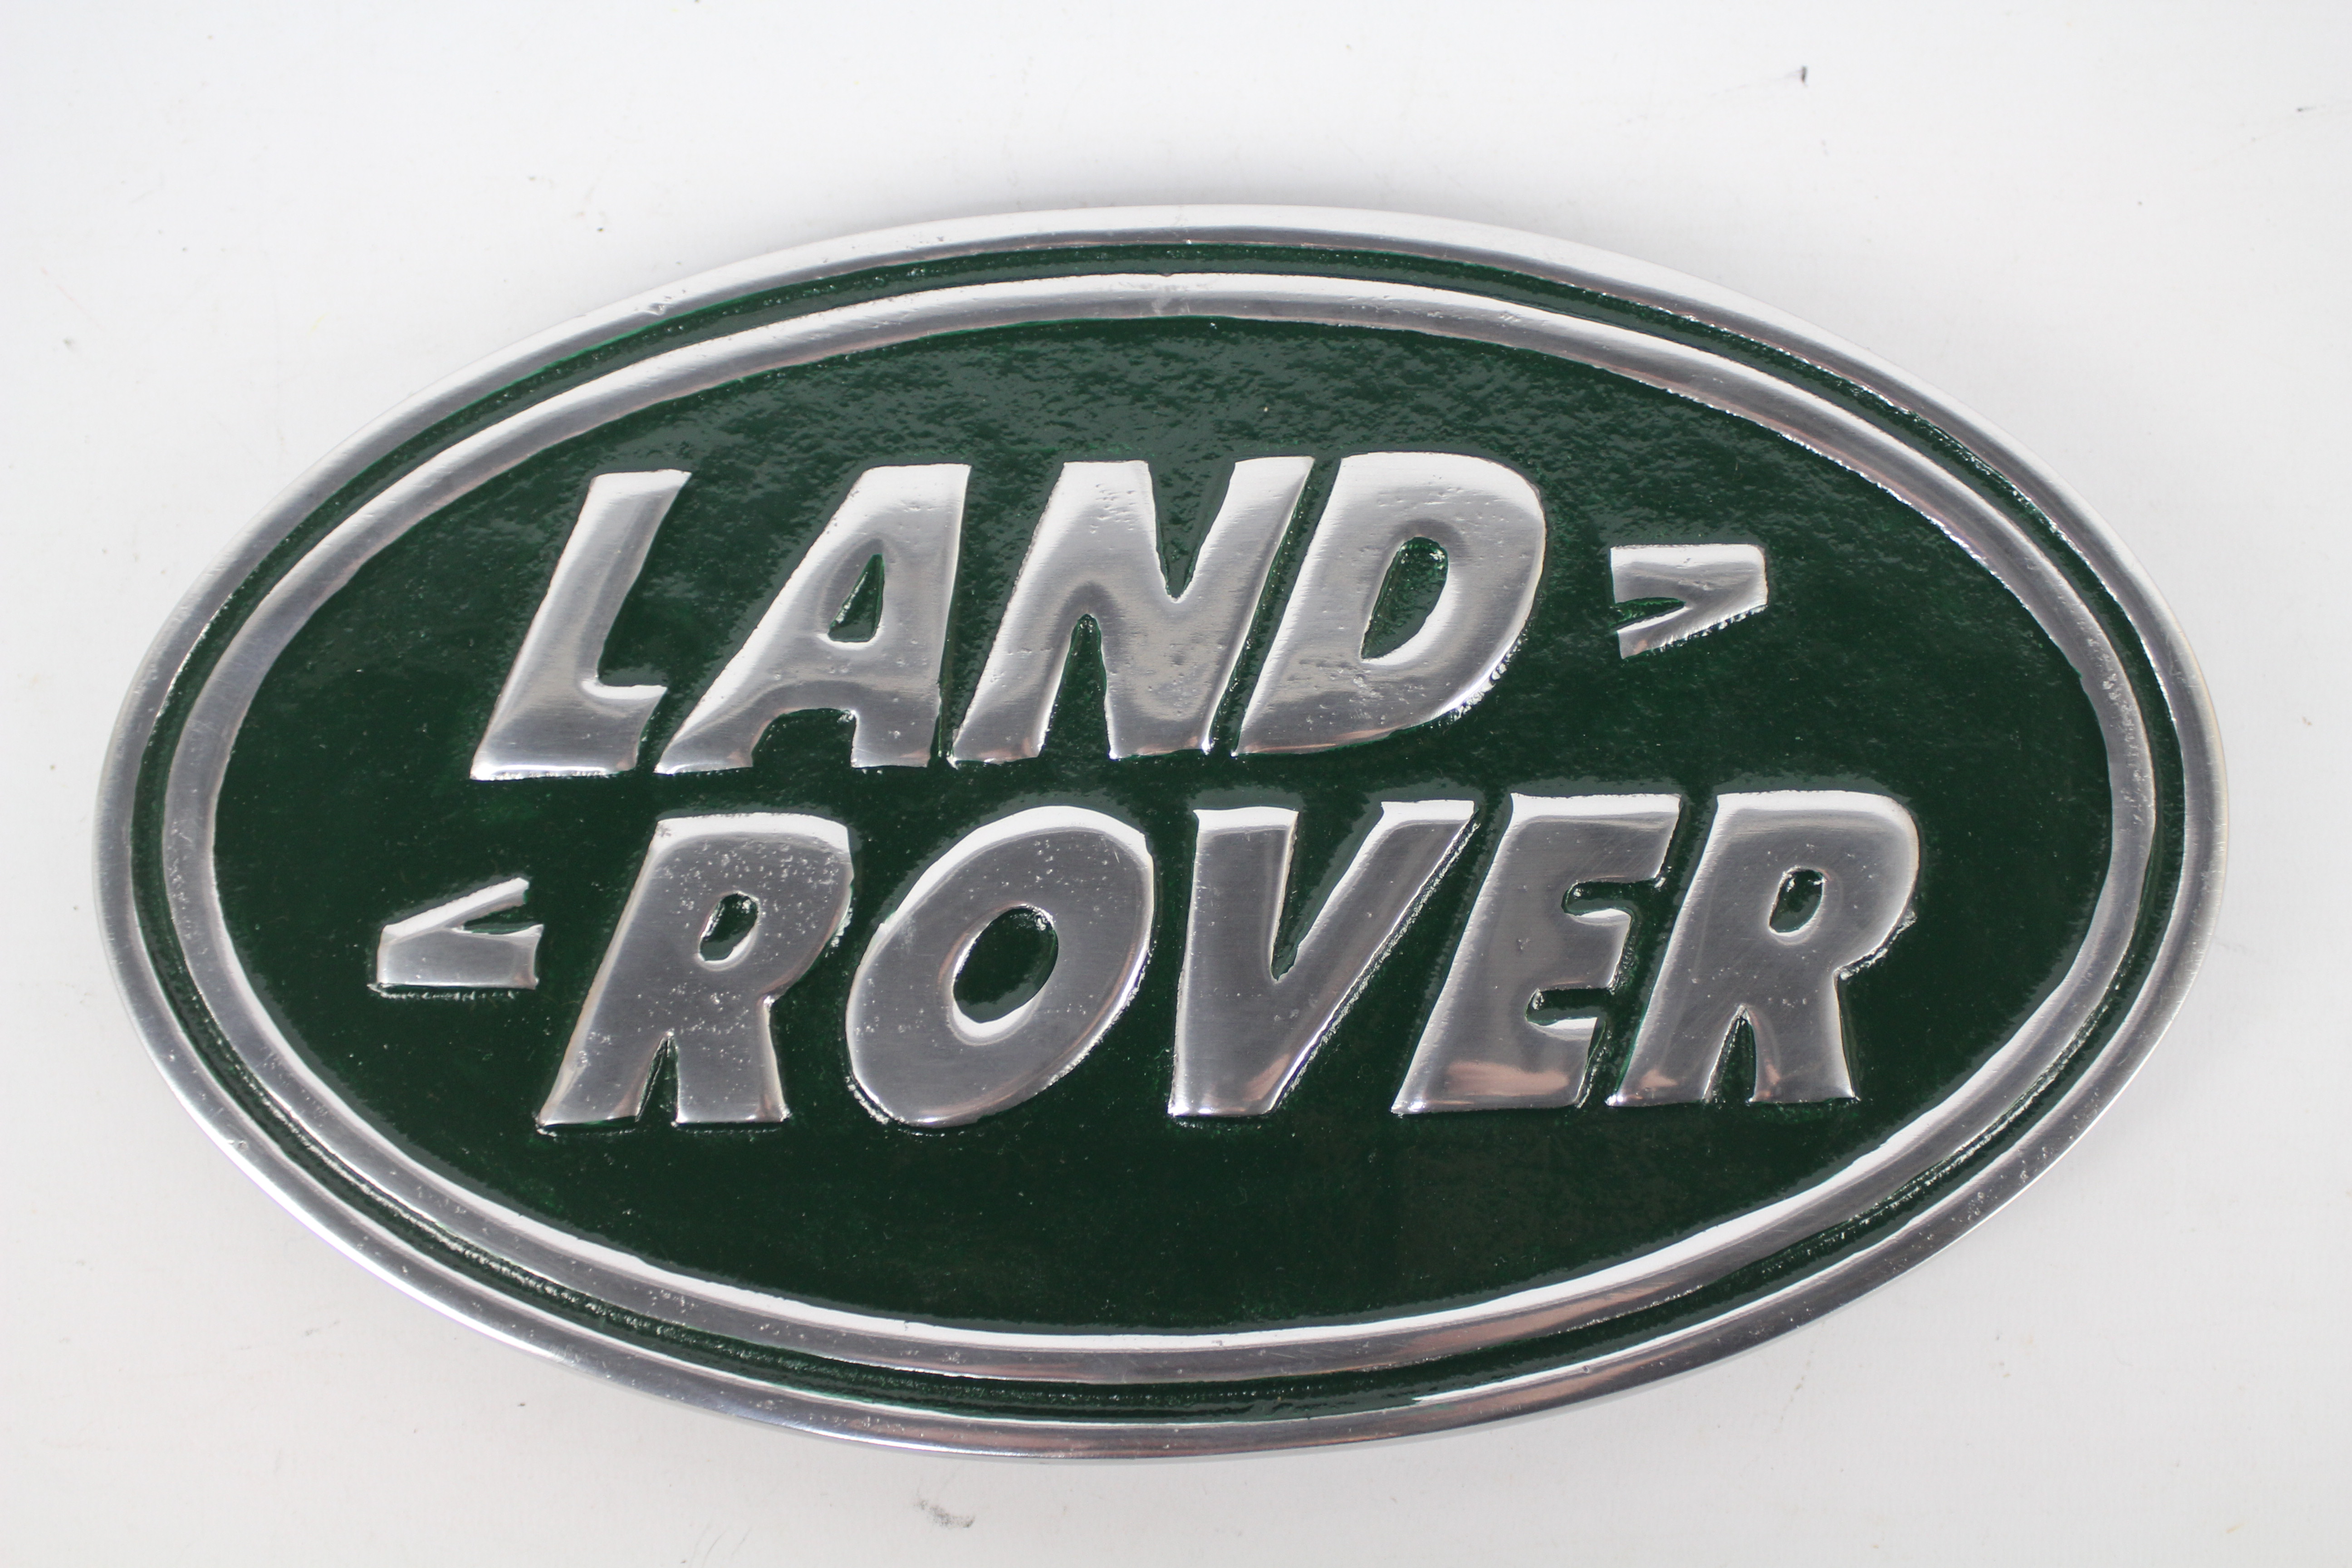 An oval shaped, aluminium plaque, marked Land Rover, approximately 18 cm x 30 cm.